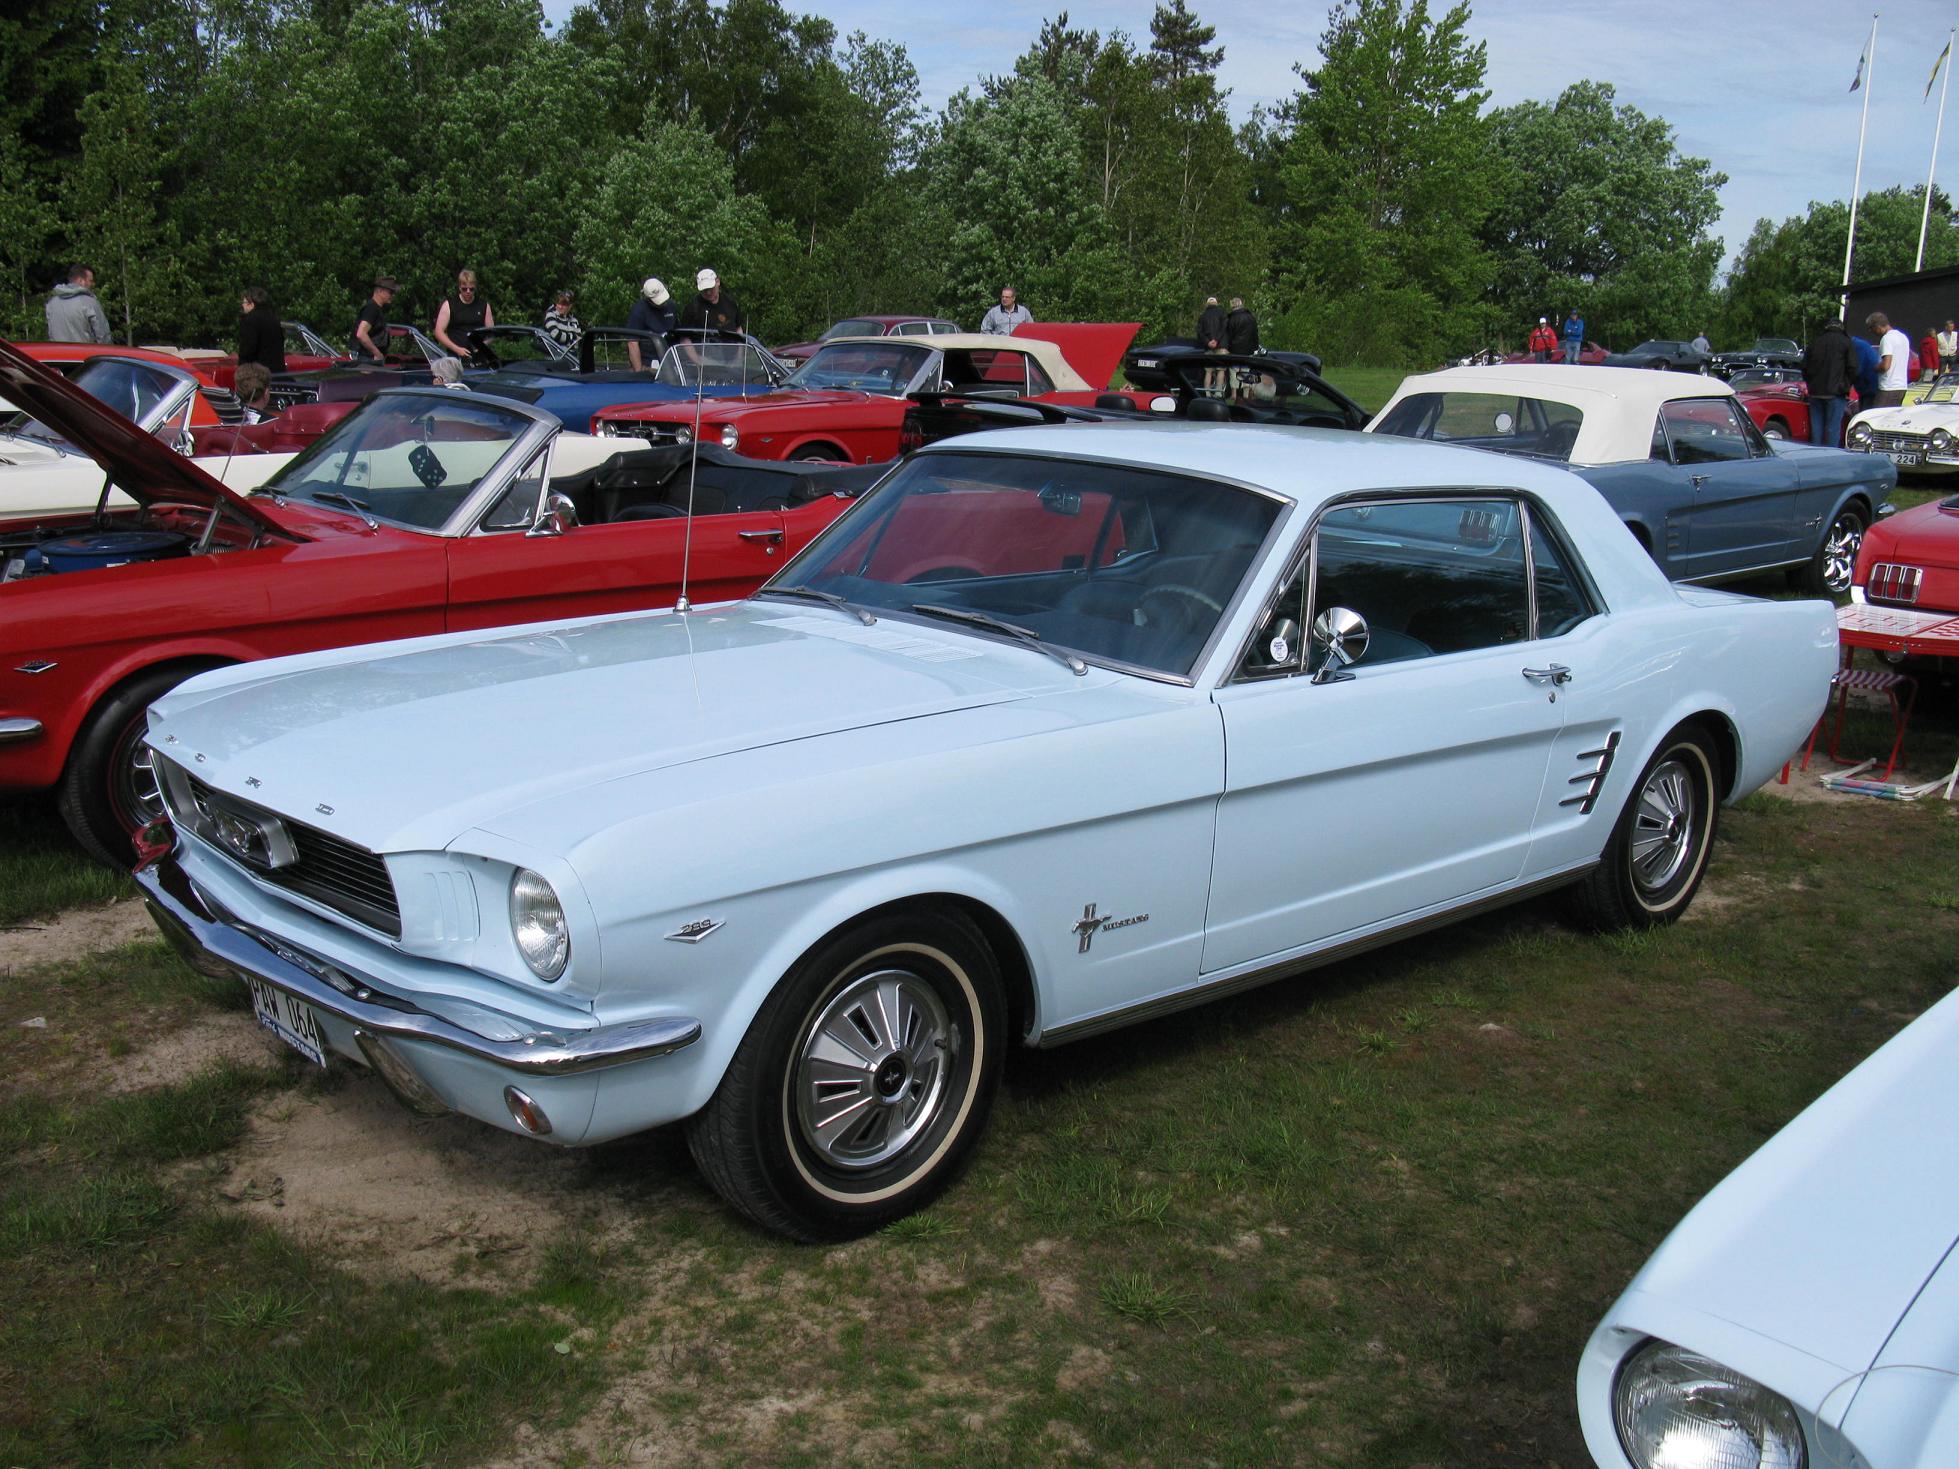 an old mustang mustang sits in front of other vintage mustangs